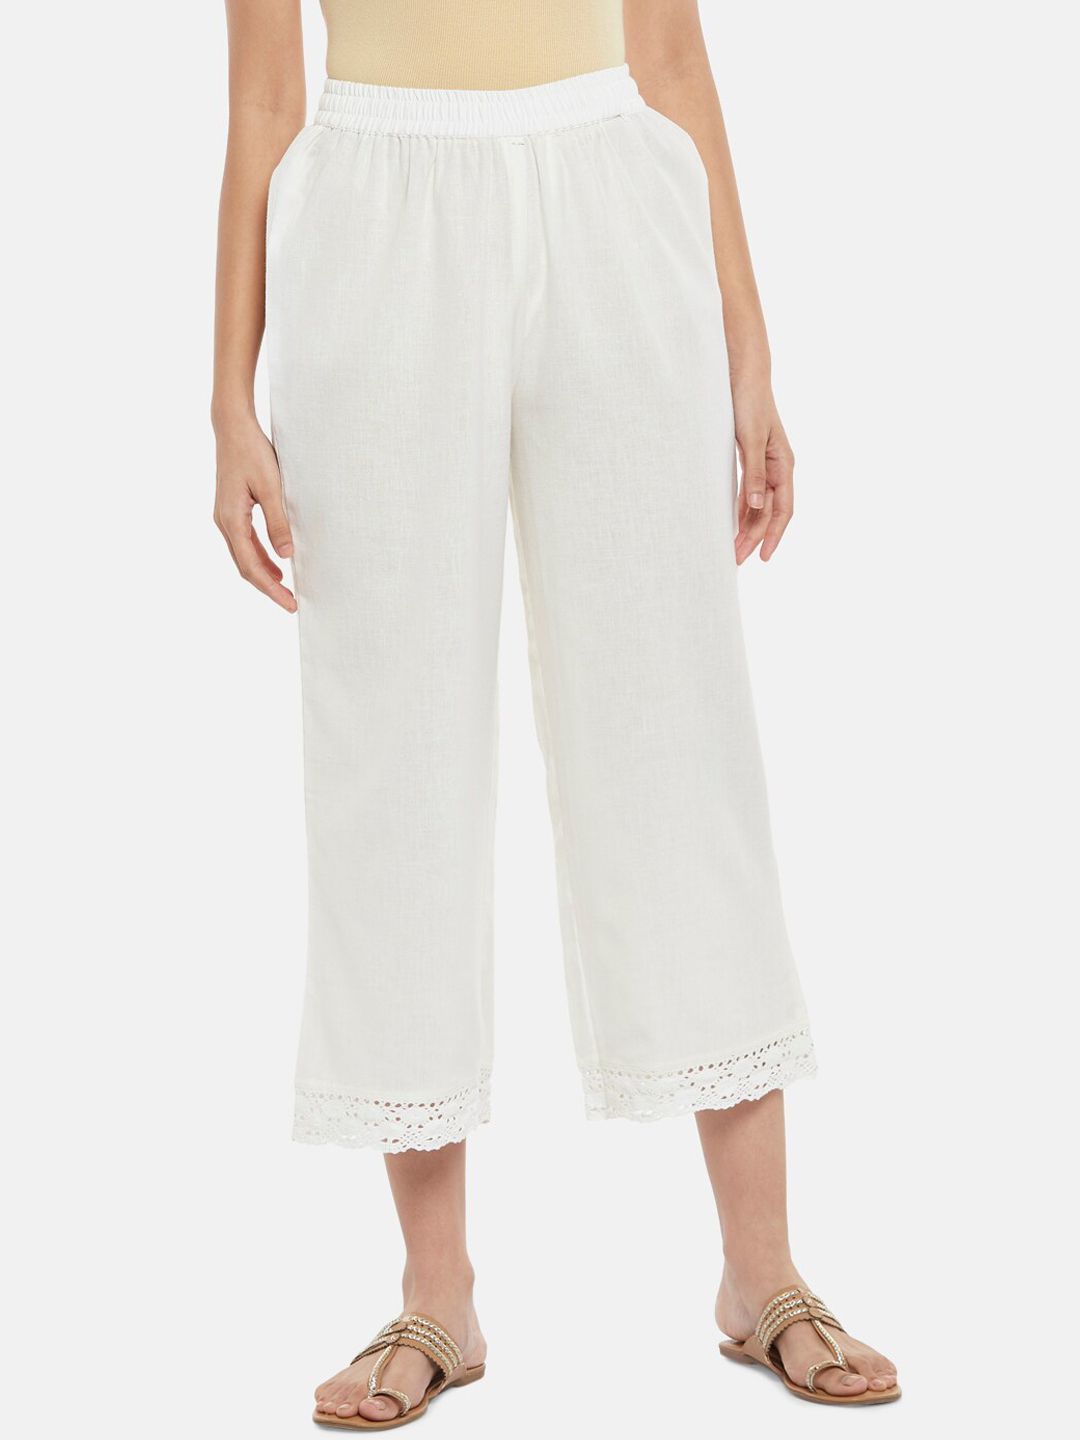 RANGMANCH BY PANTALOONS Women Off White Culottes Trousers Price in India